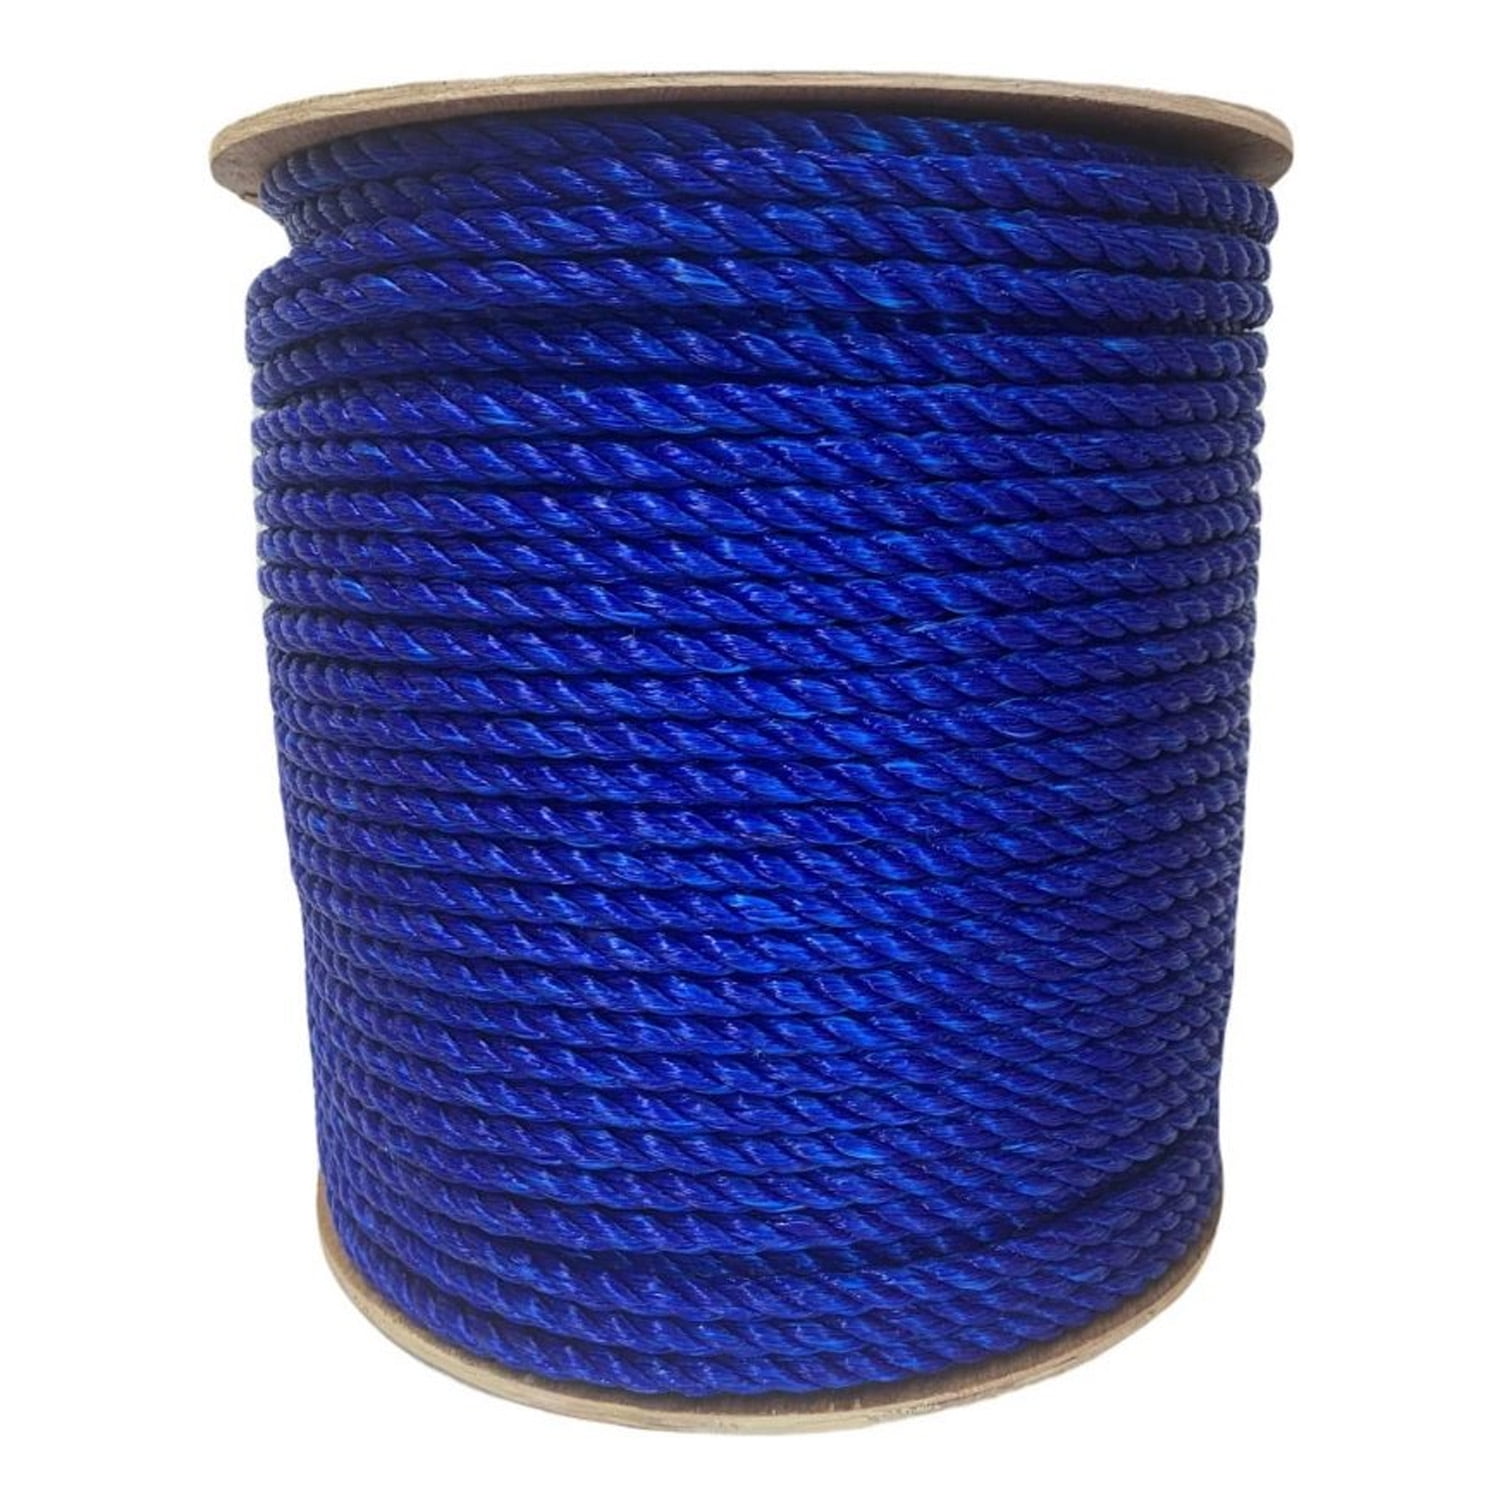 ATERET Twisted 3-Strand Blue Polypropylene Rope Monofilament I 3/8 x 600  Feet I 2,430 lbs. Tensile Strength I Lightweight & Heavy-Duty Synthetic  Cord for DIY Projects, Marine, Commercial Use 